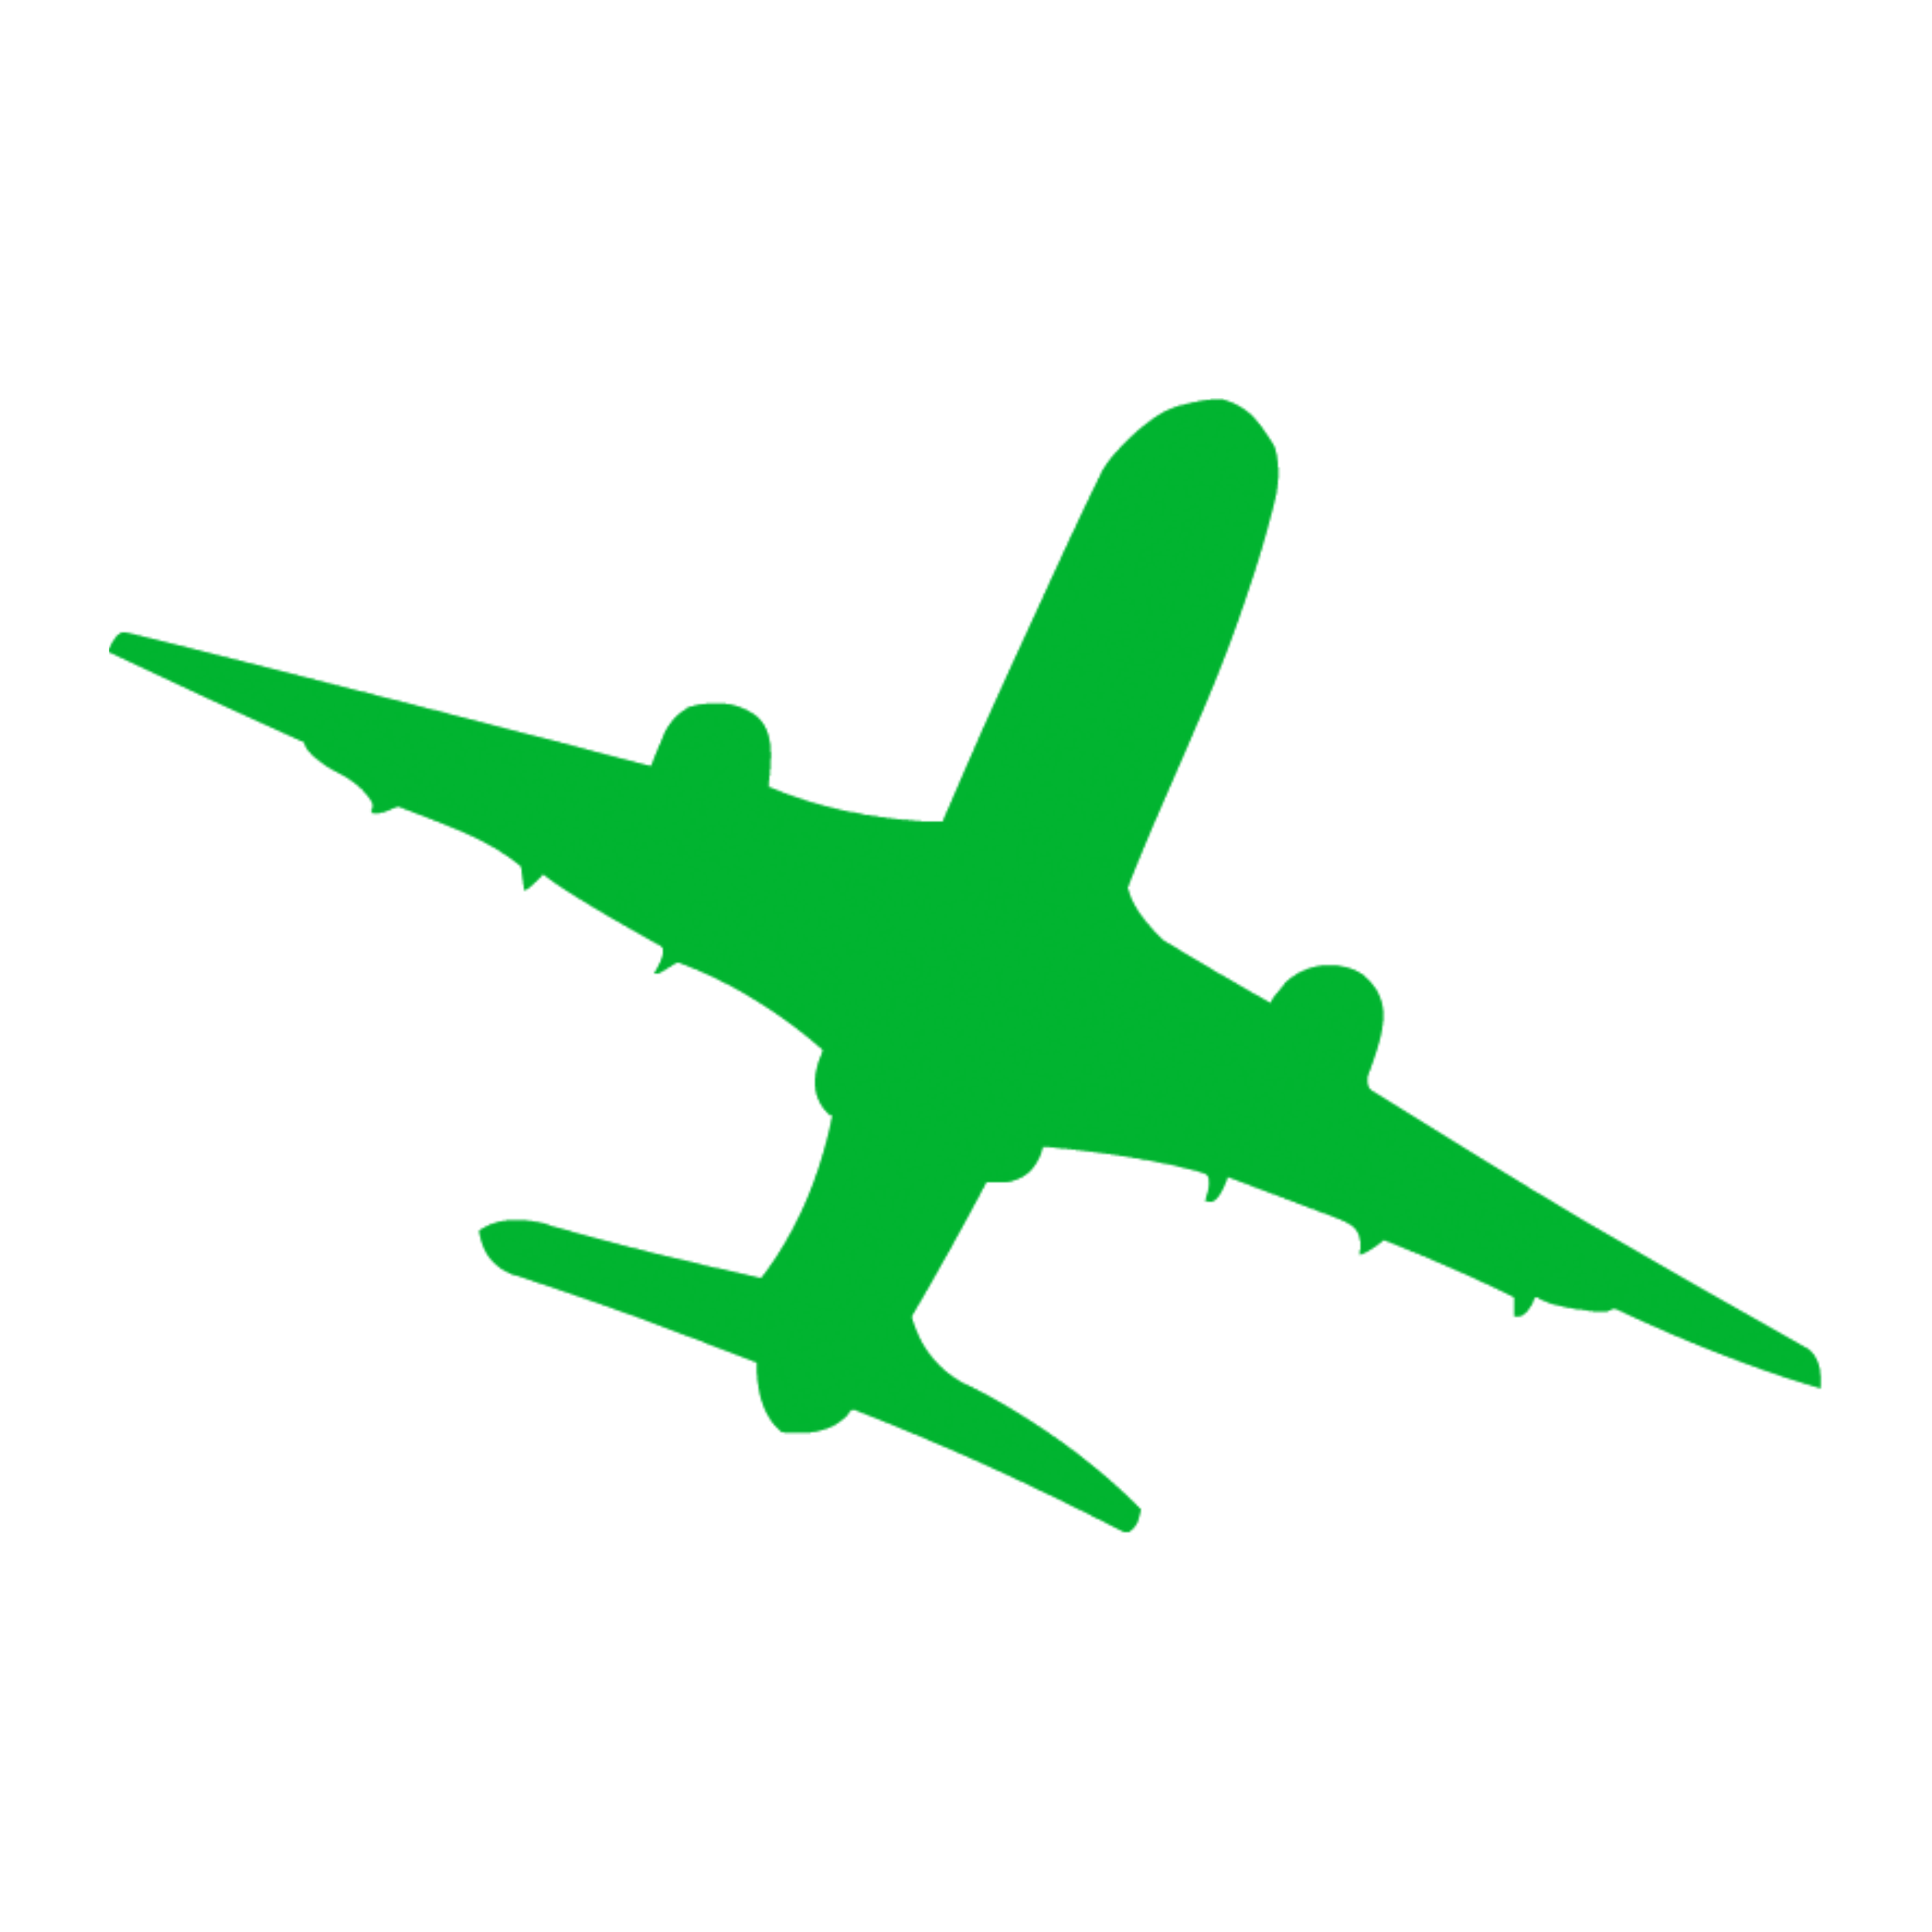 clipart plane commercial airplane